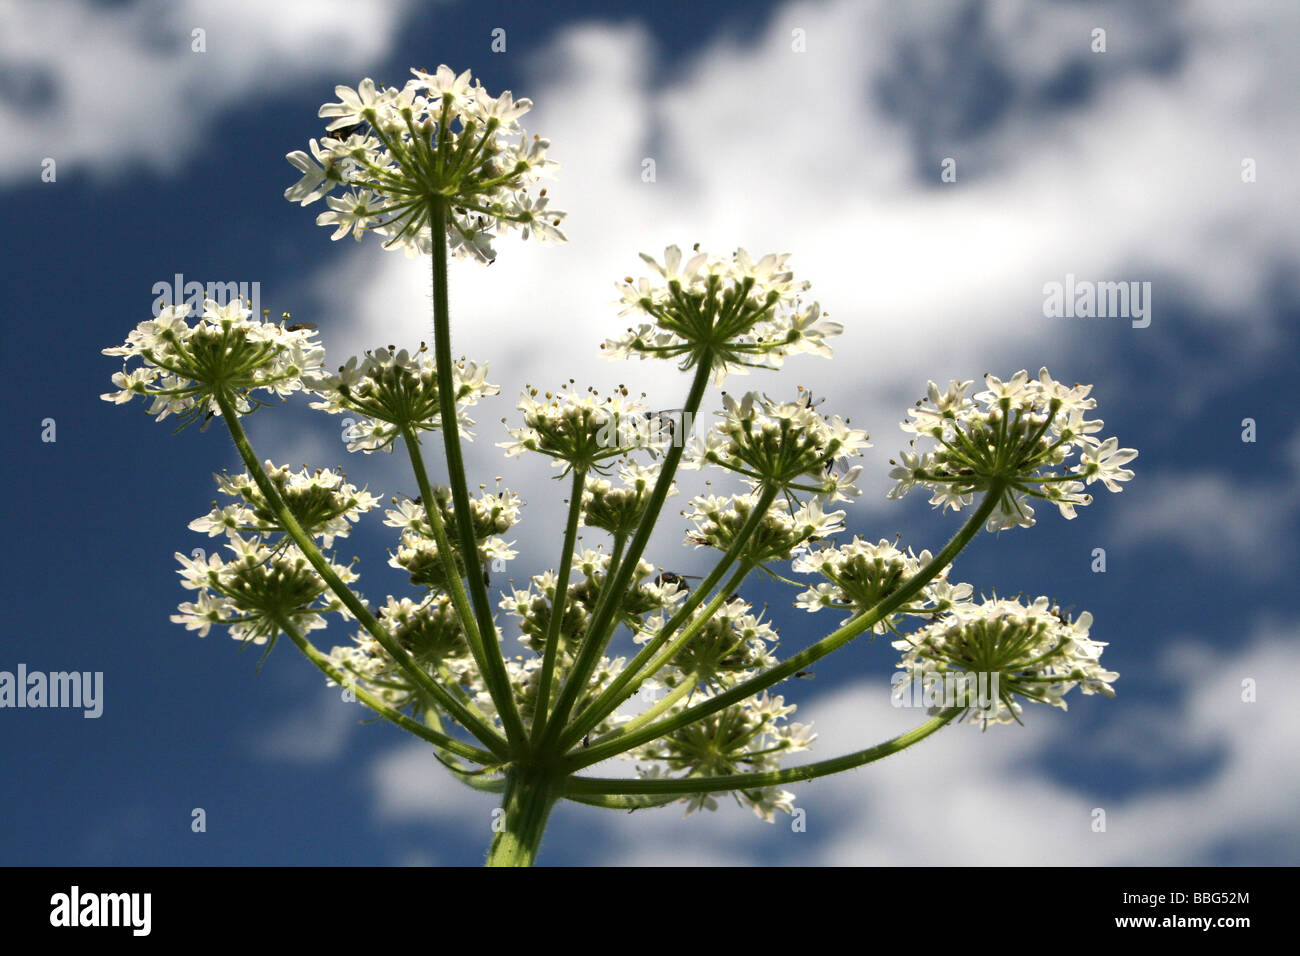 View From Underneath The Flowers Of An Umbellifer Stock Photo